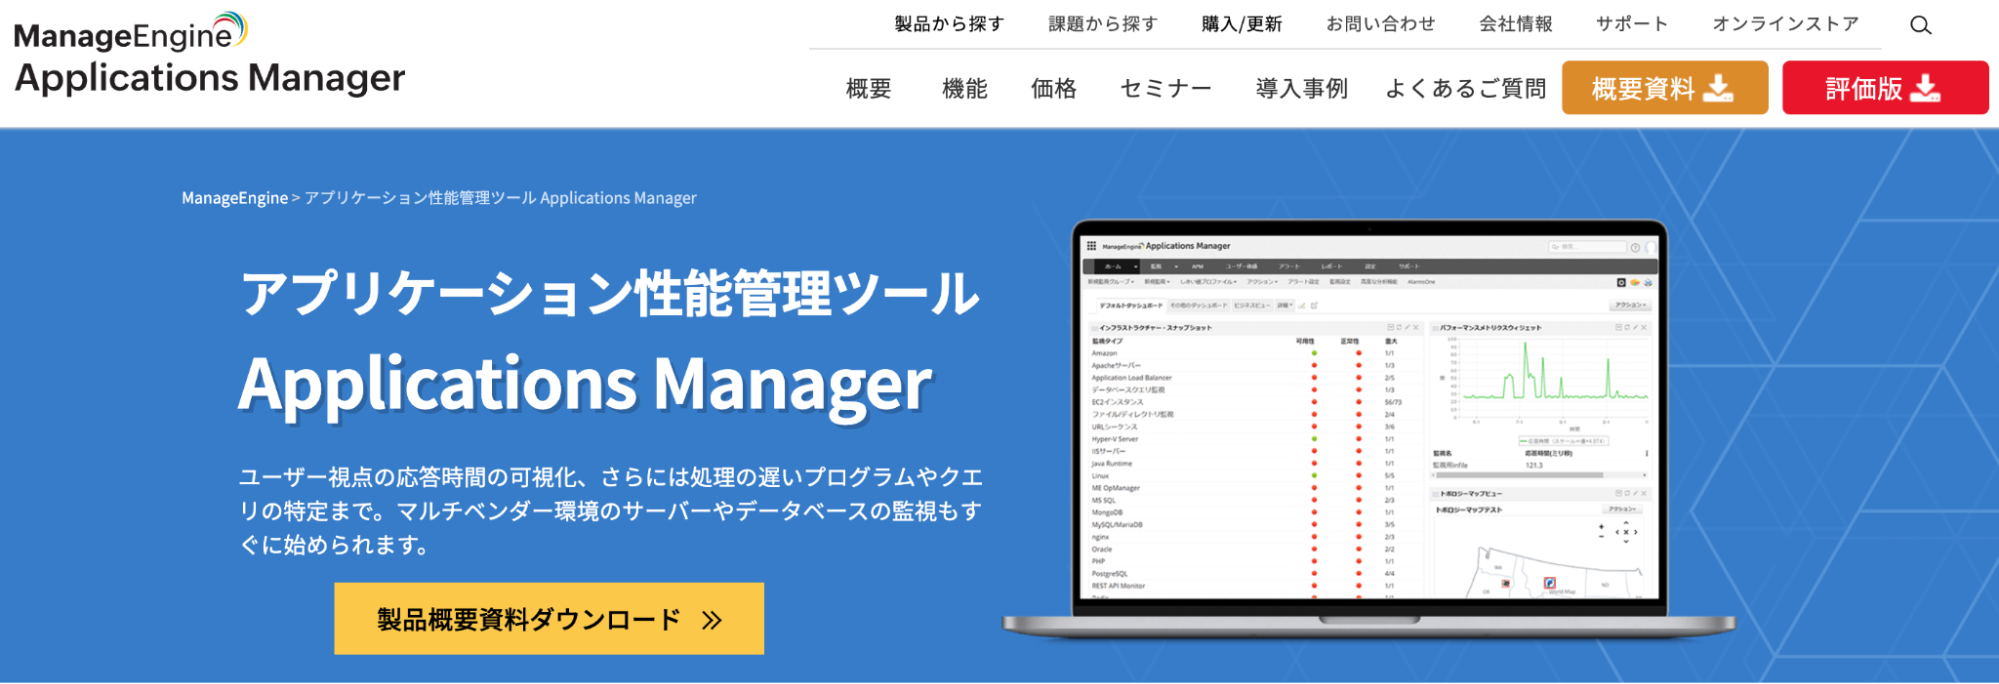  Applications Manager